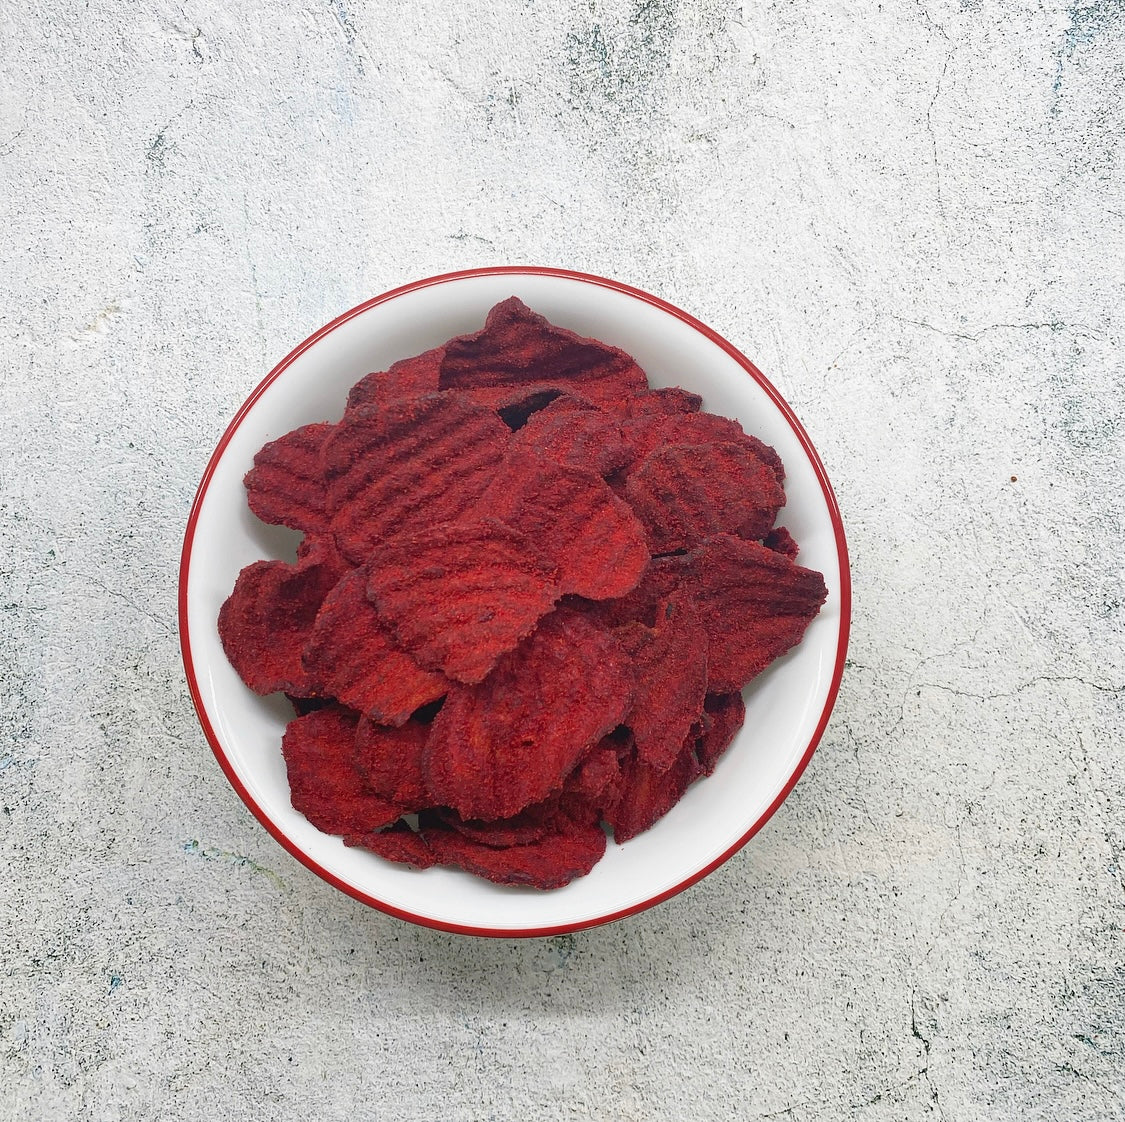 Beet Chips (Beetroot Chips)